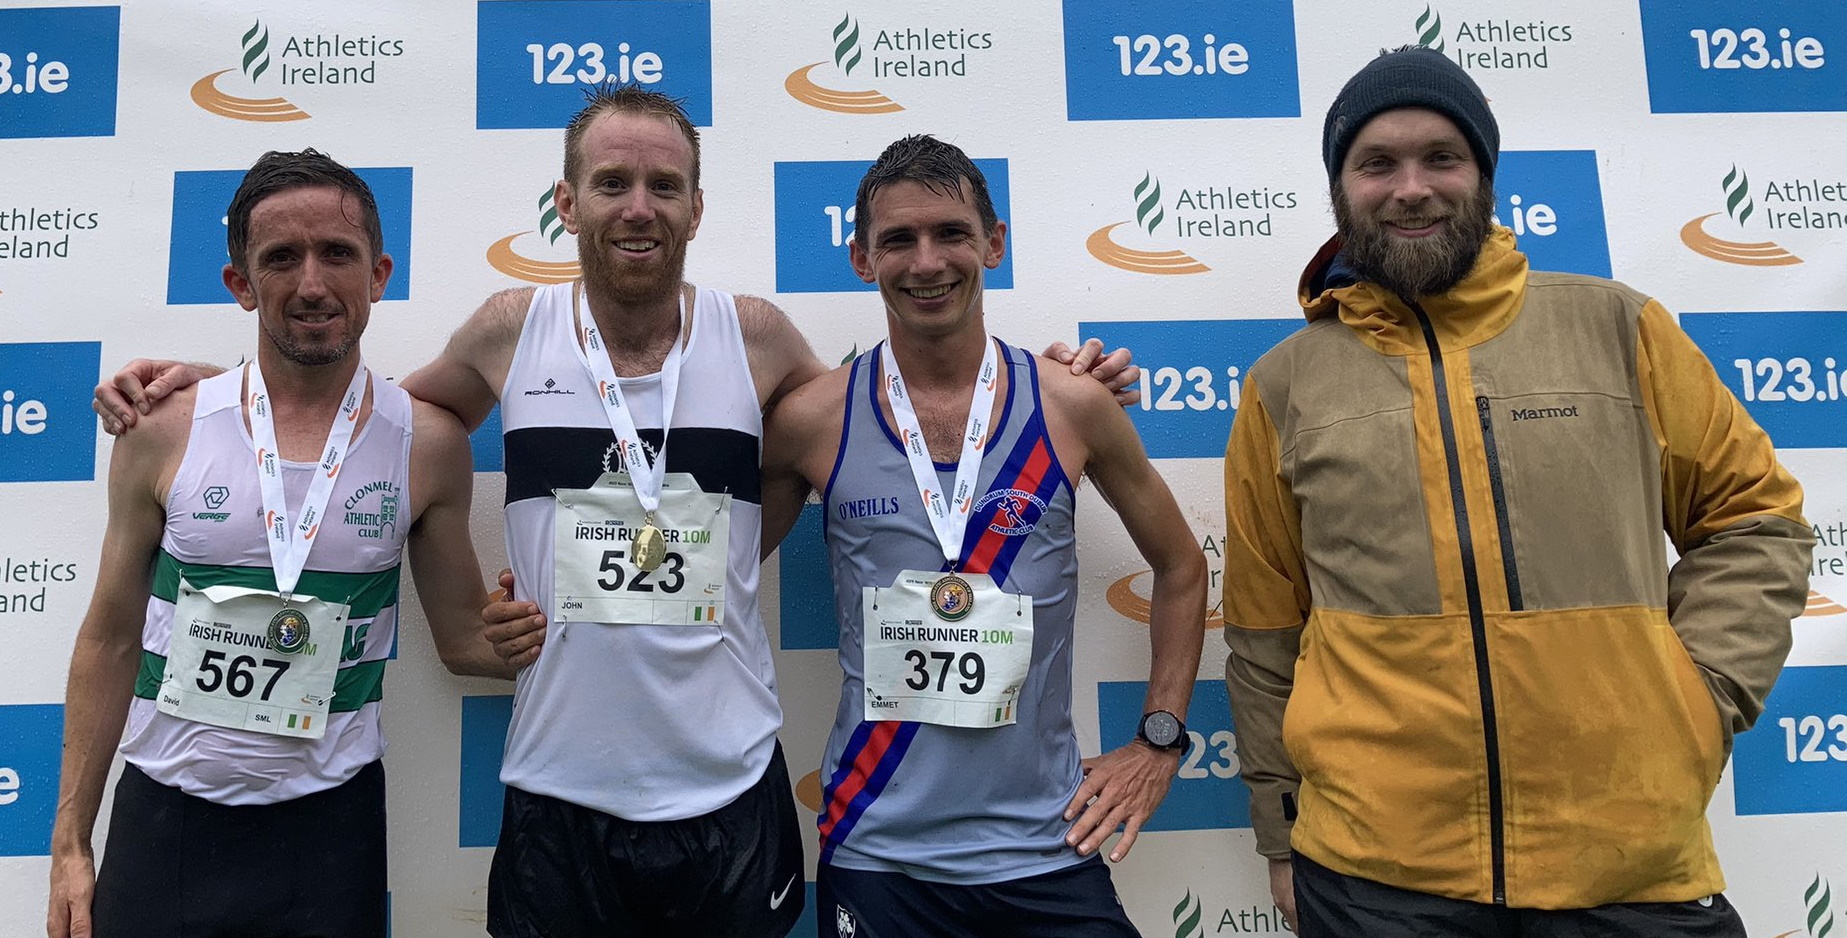 TRAVERS AND RYAN SECURE NATIONAL 10 MILE TITLES